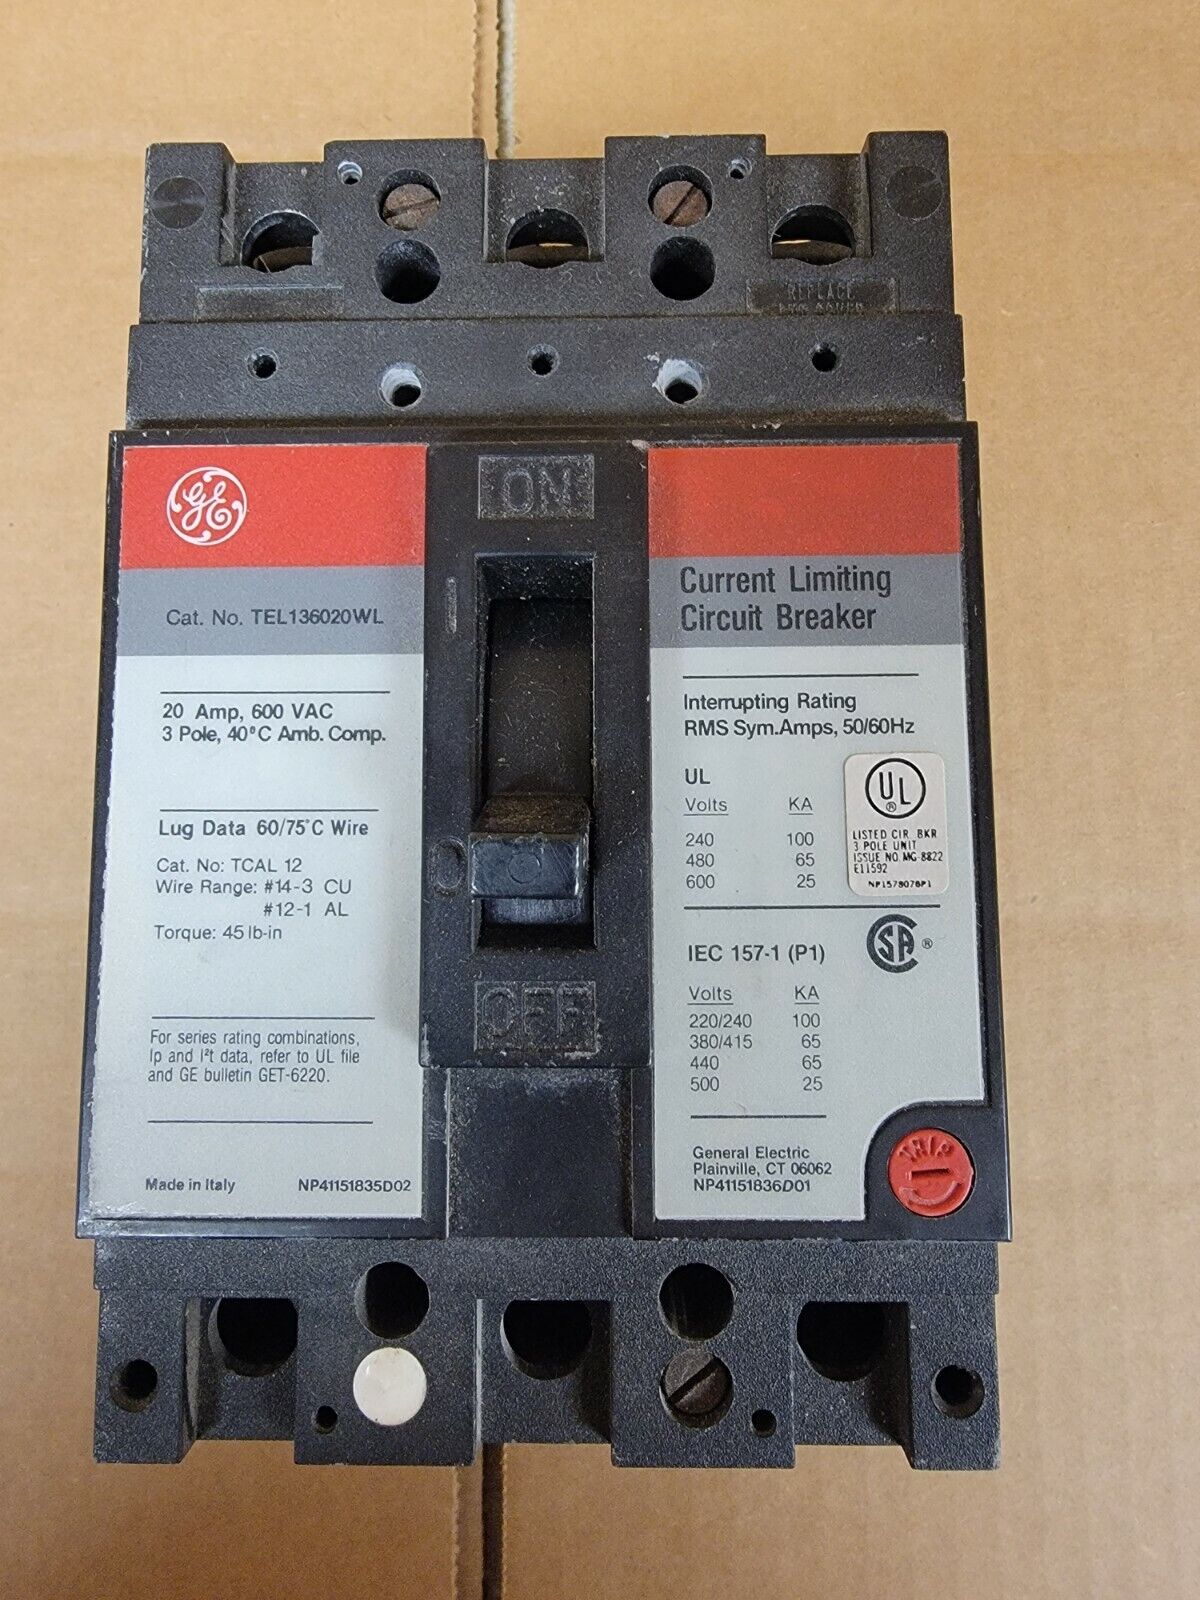 GE General Electric TEL136020WL 20A 600V 3 Pole Current Limiting Circuit Breaker